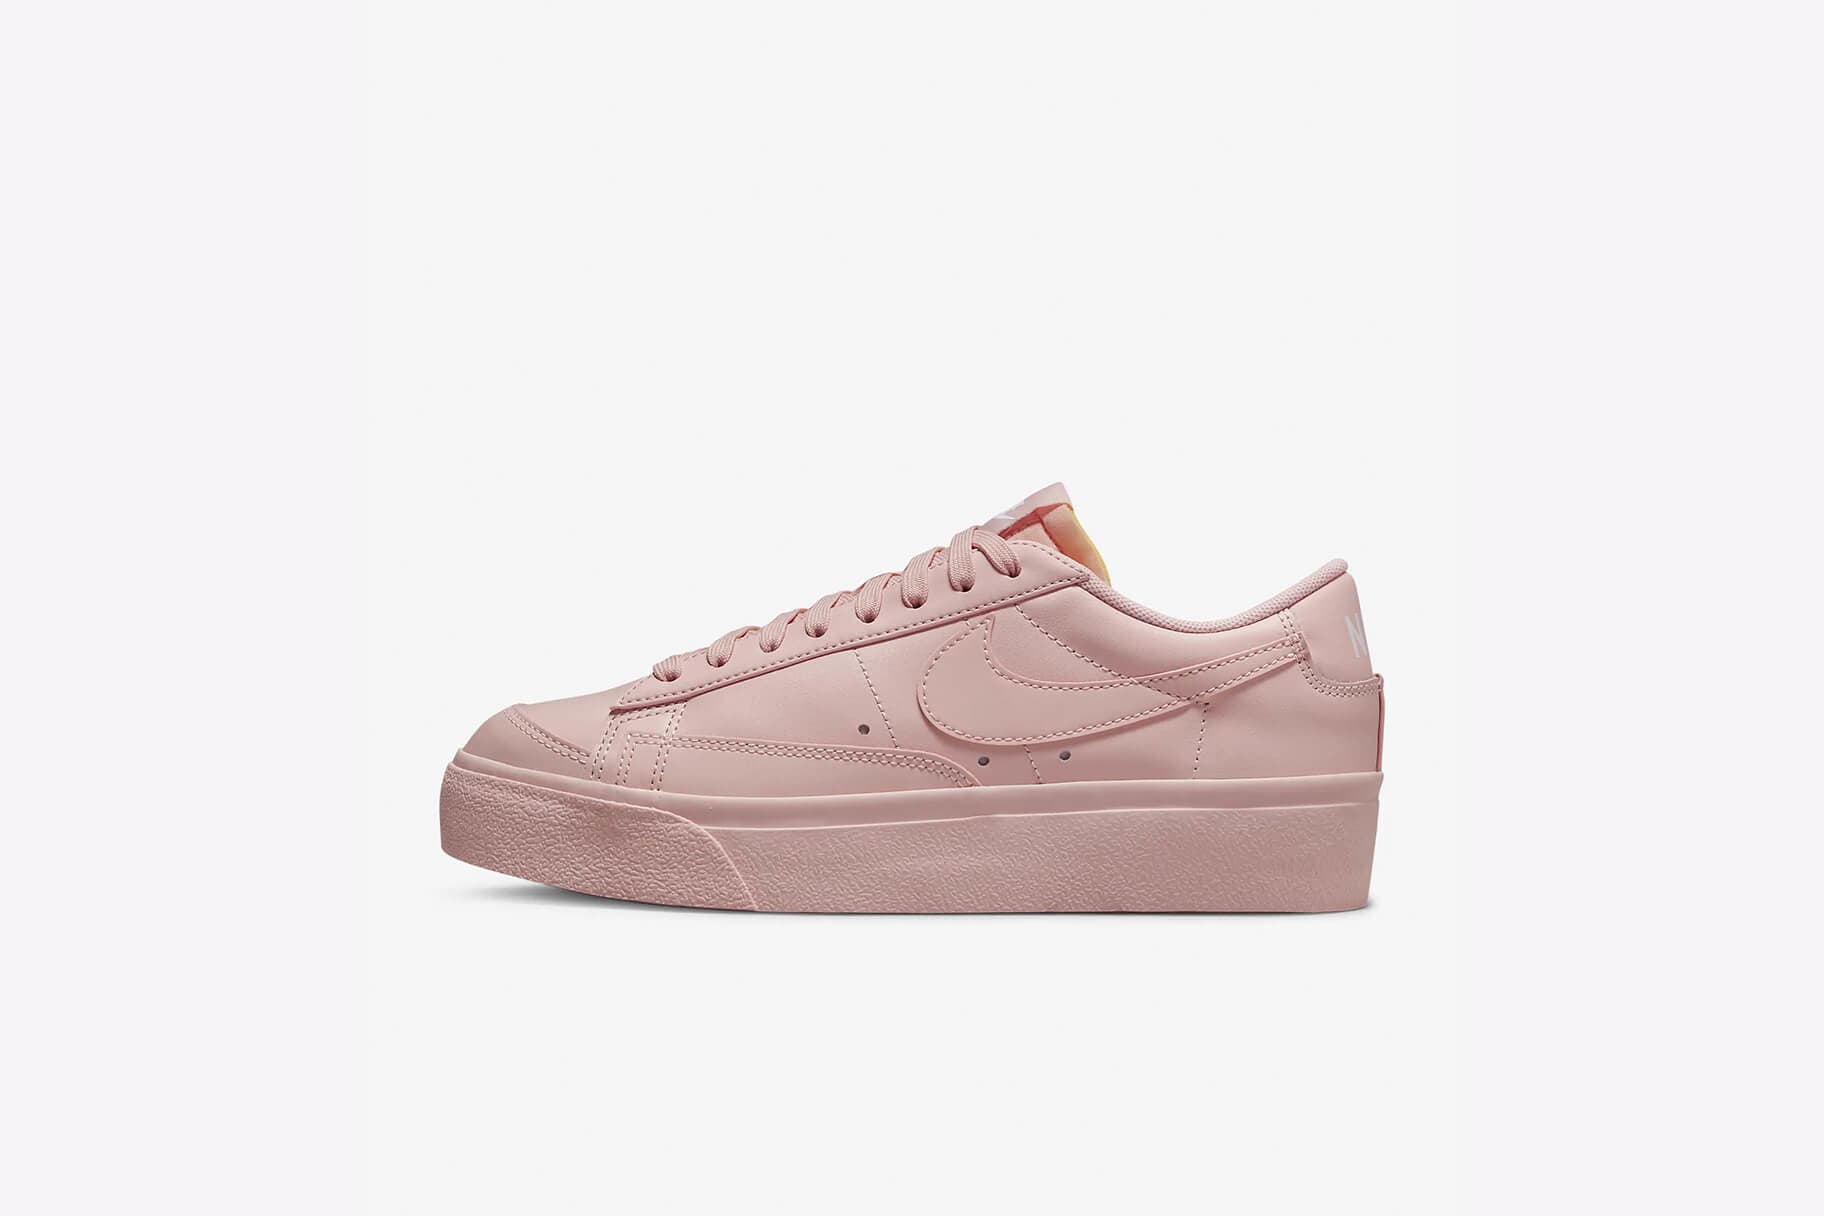 Best Pink Nike Shoes Shop Now. Nike.com